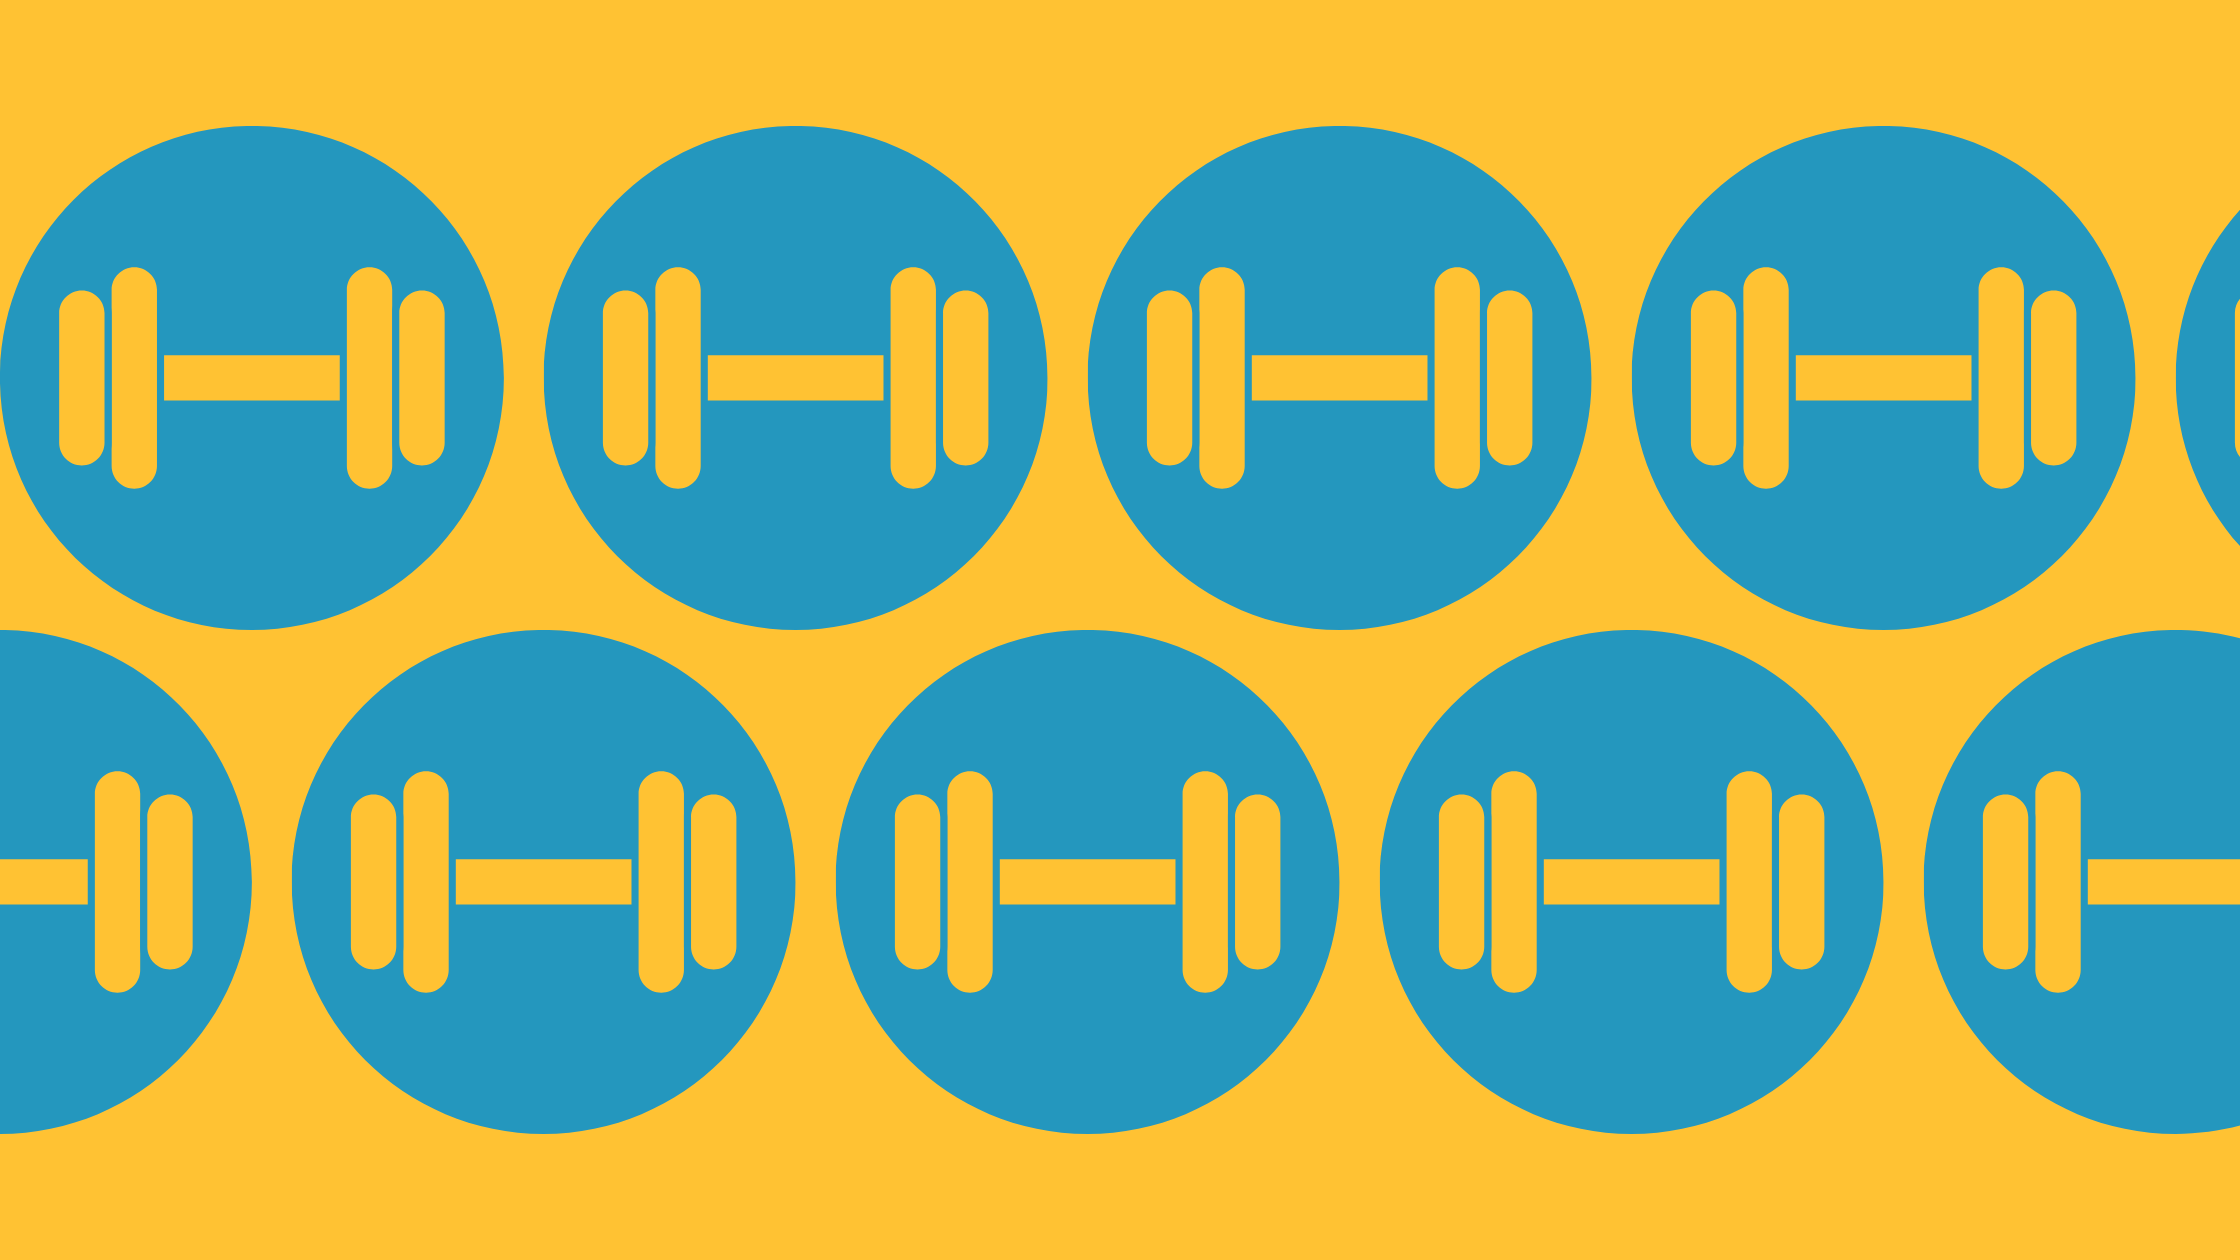 A row of dumbbell icons